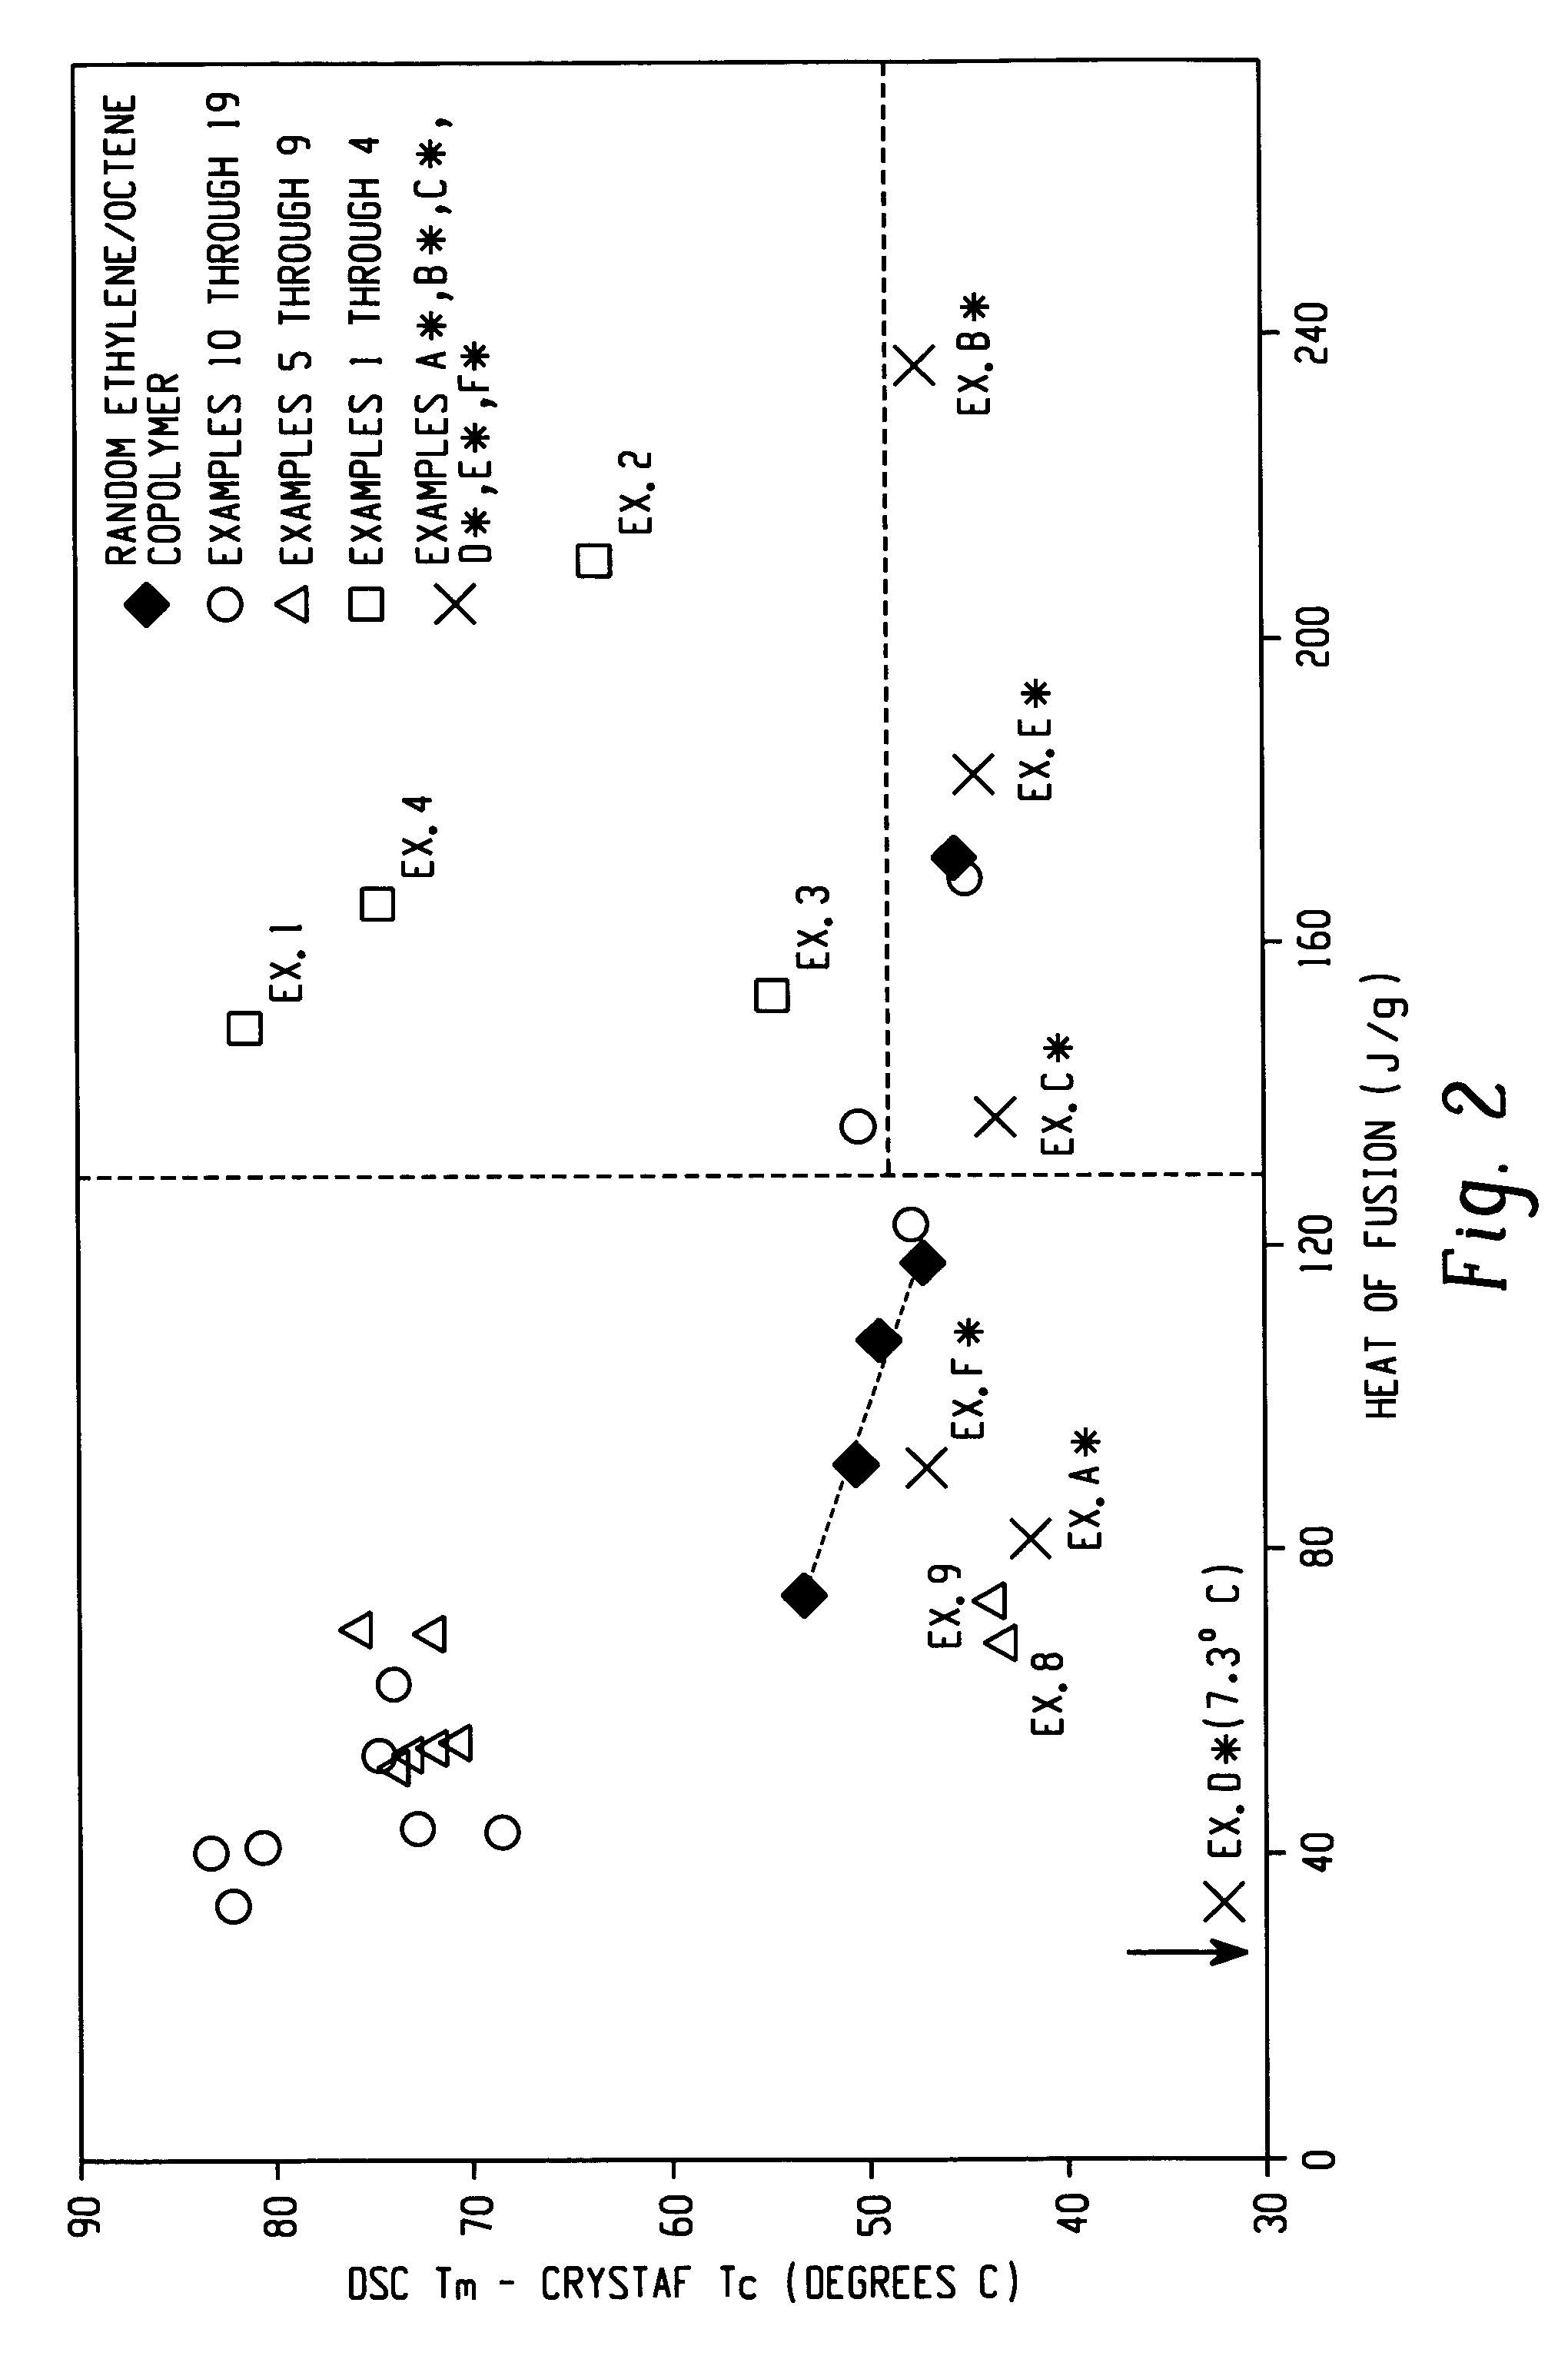 Anti-blocking compositions comprising interpolymers of ethylene/alpha-olefins